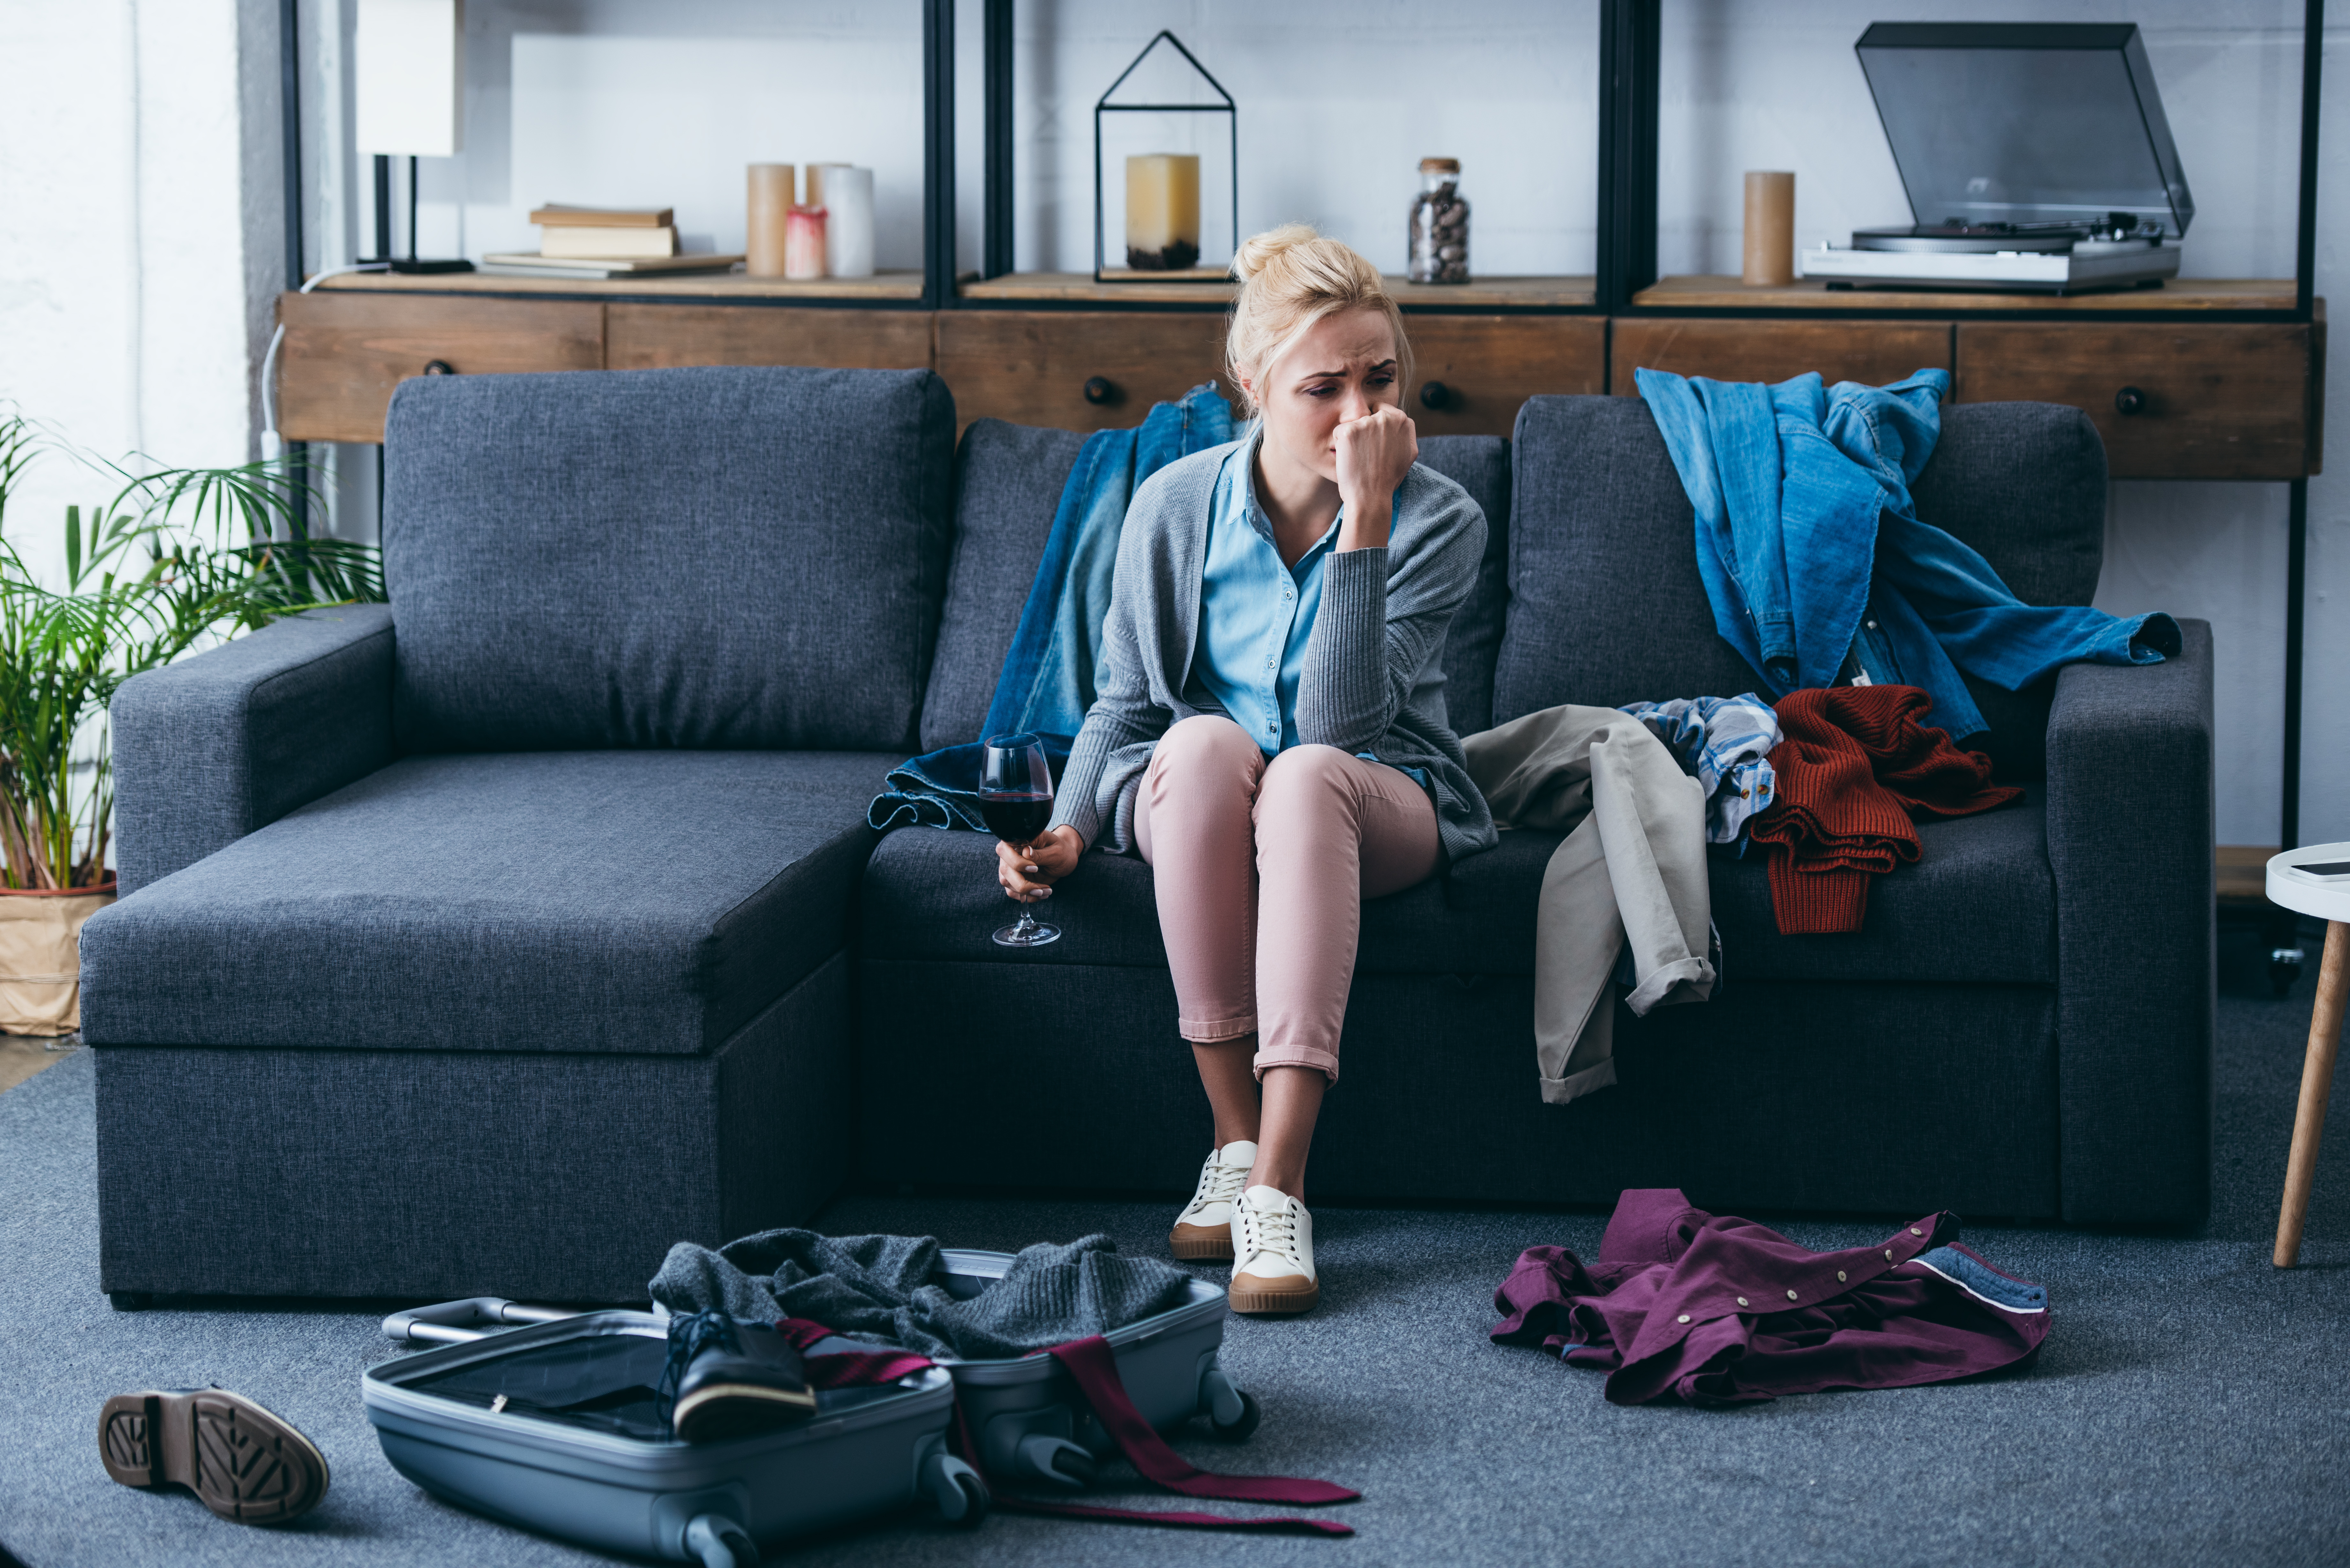 Depressed woman sitting on sofa and crying while packing | Source: Shutterstock